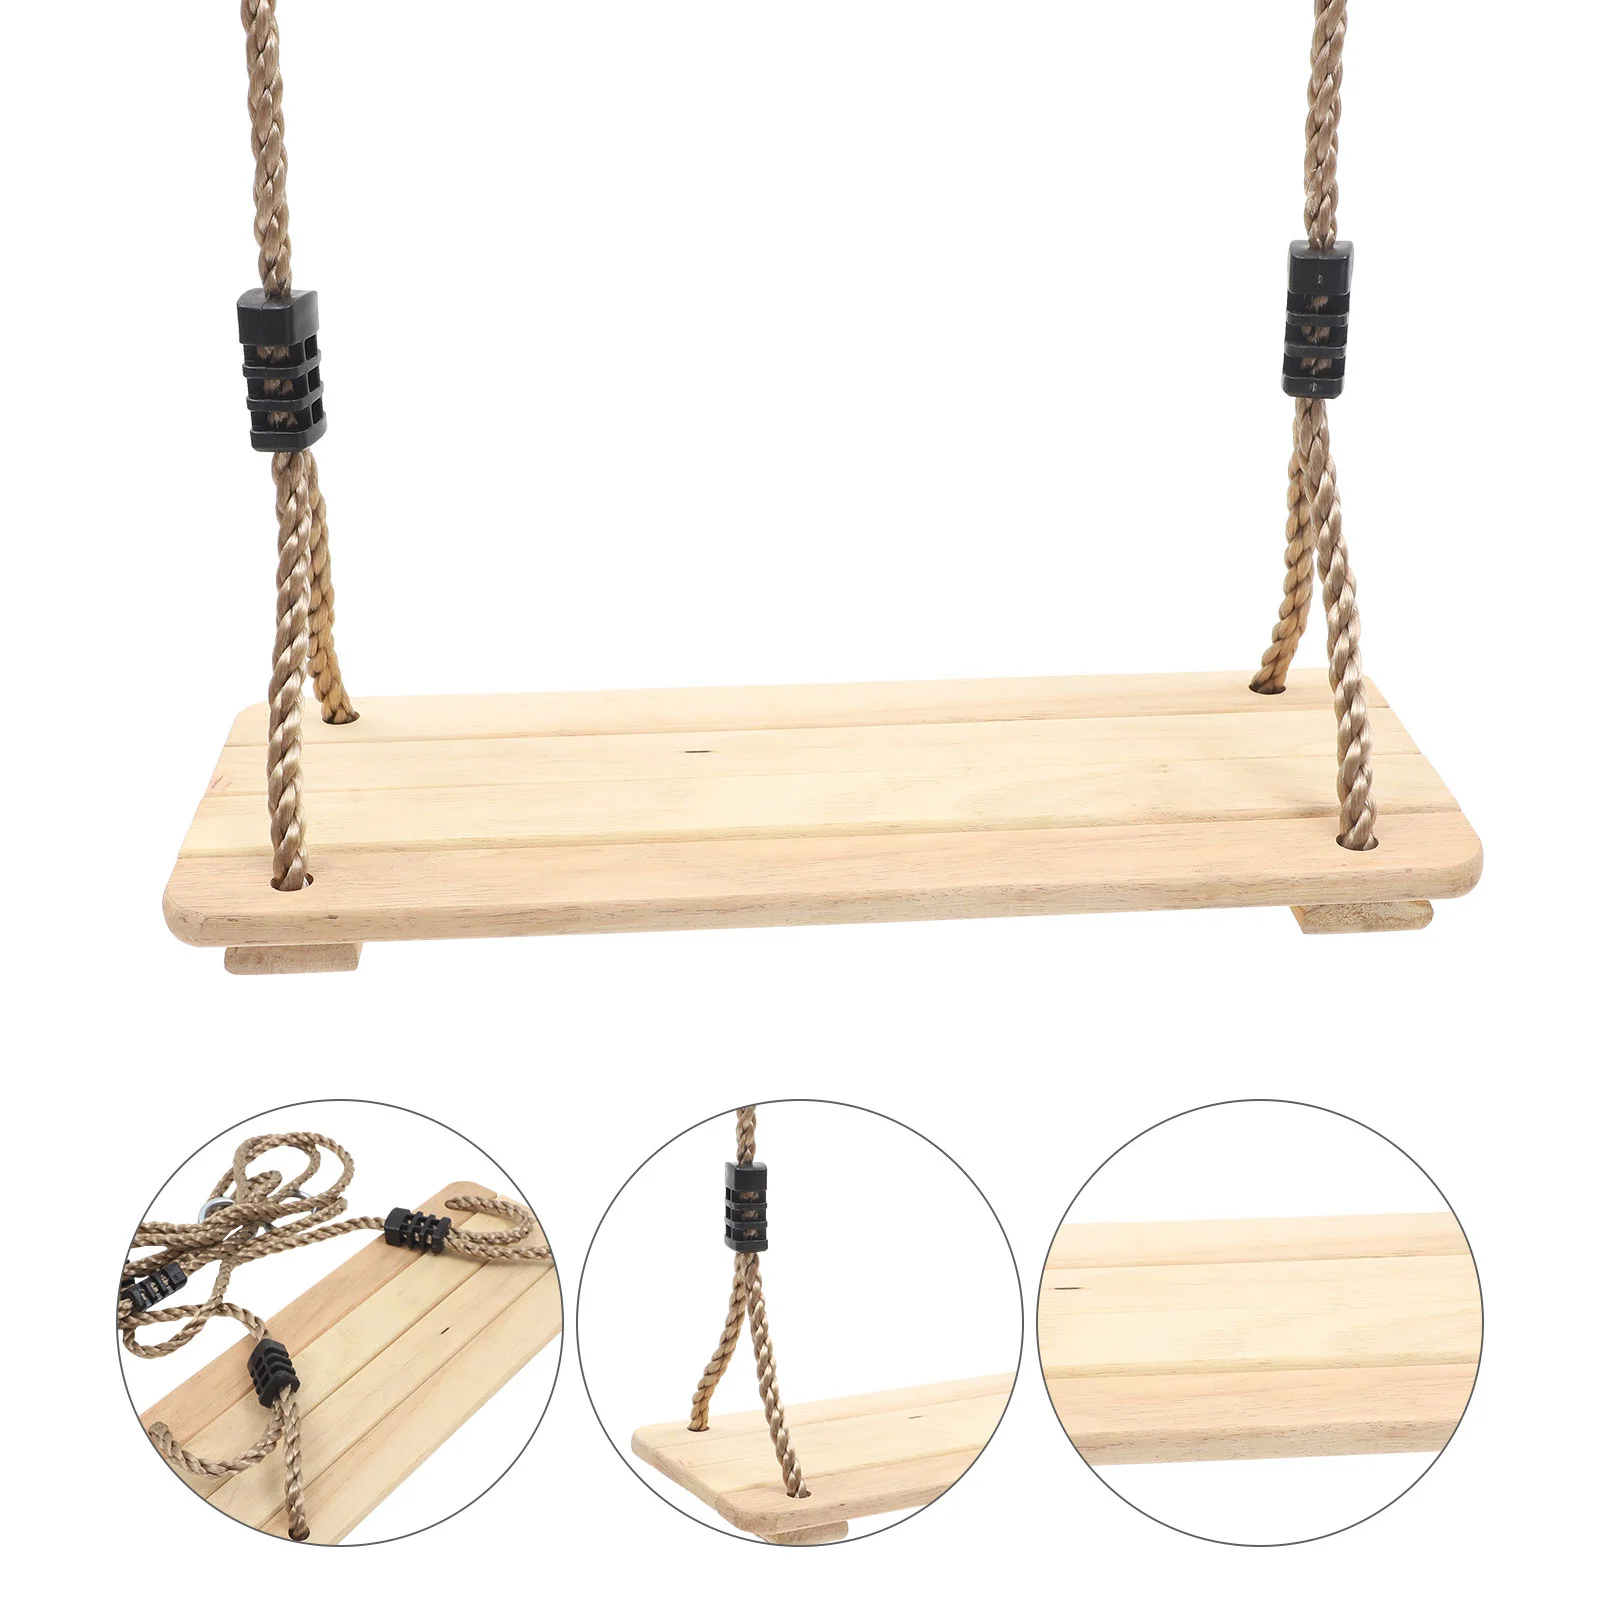 

Wooden Hanging Swing Toy Outdoor Swing Plaything Park Garden Entertainment Toy Swings